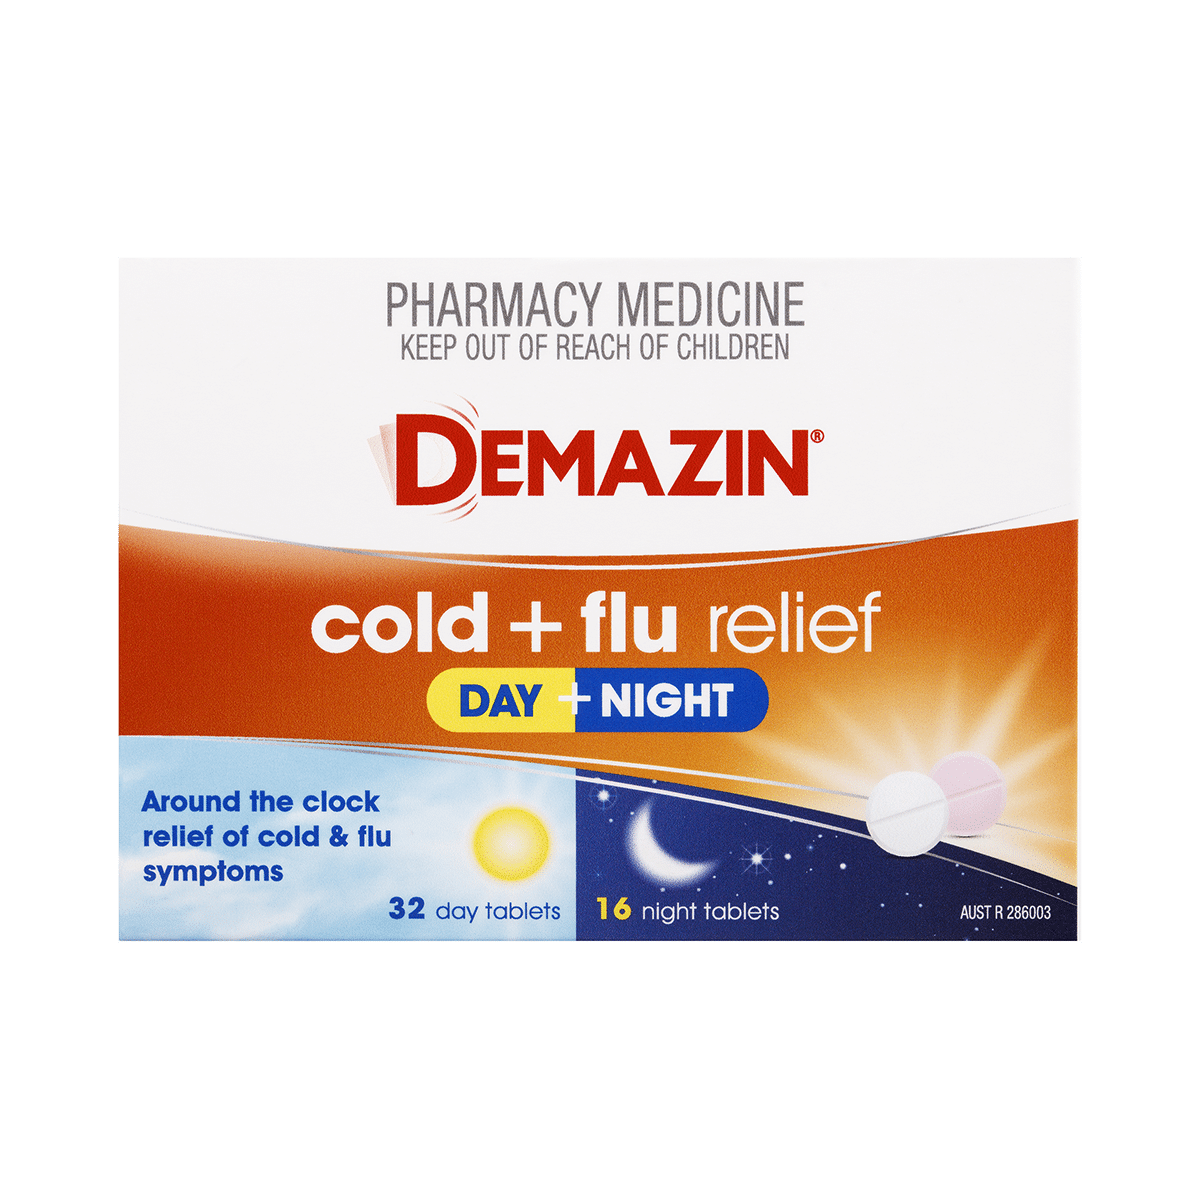 Demazin Cold + Flu Relief Day + Night Tablets 48 tablets